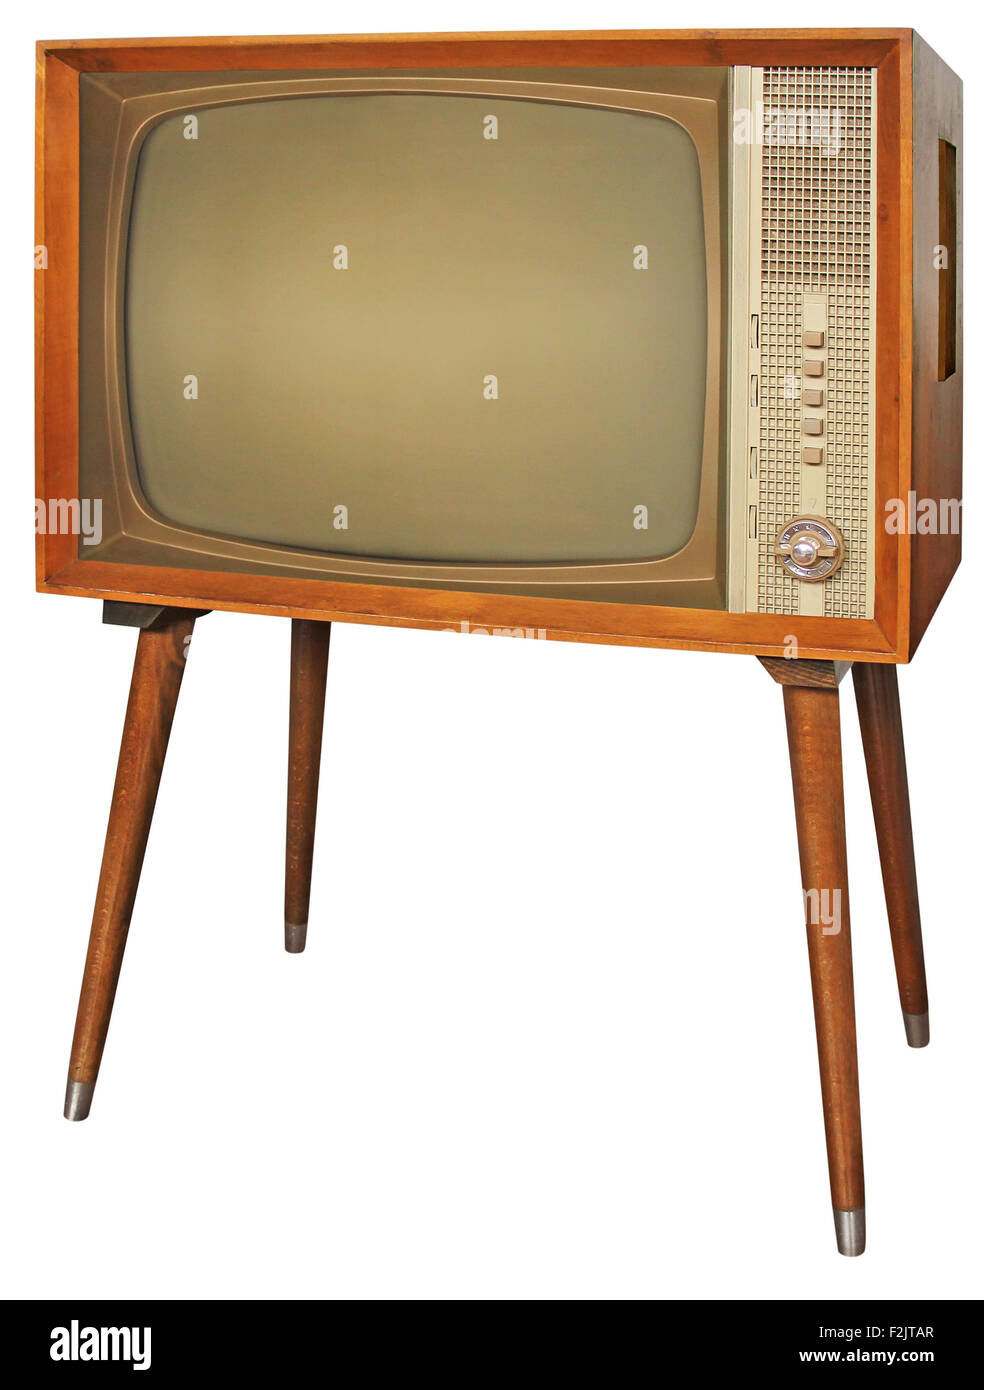 Wooden Old television isolated with clipping path Stock Photo